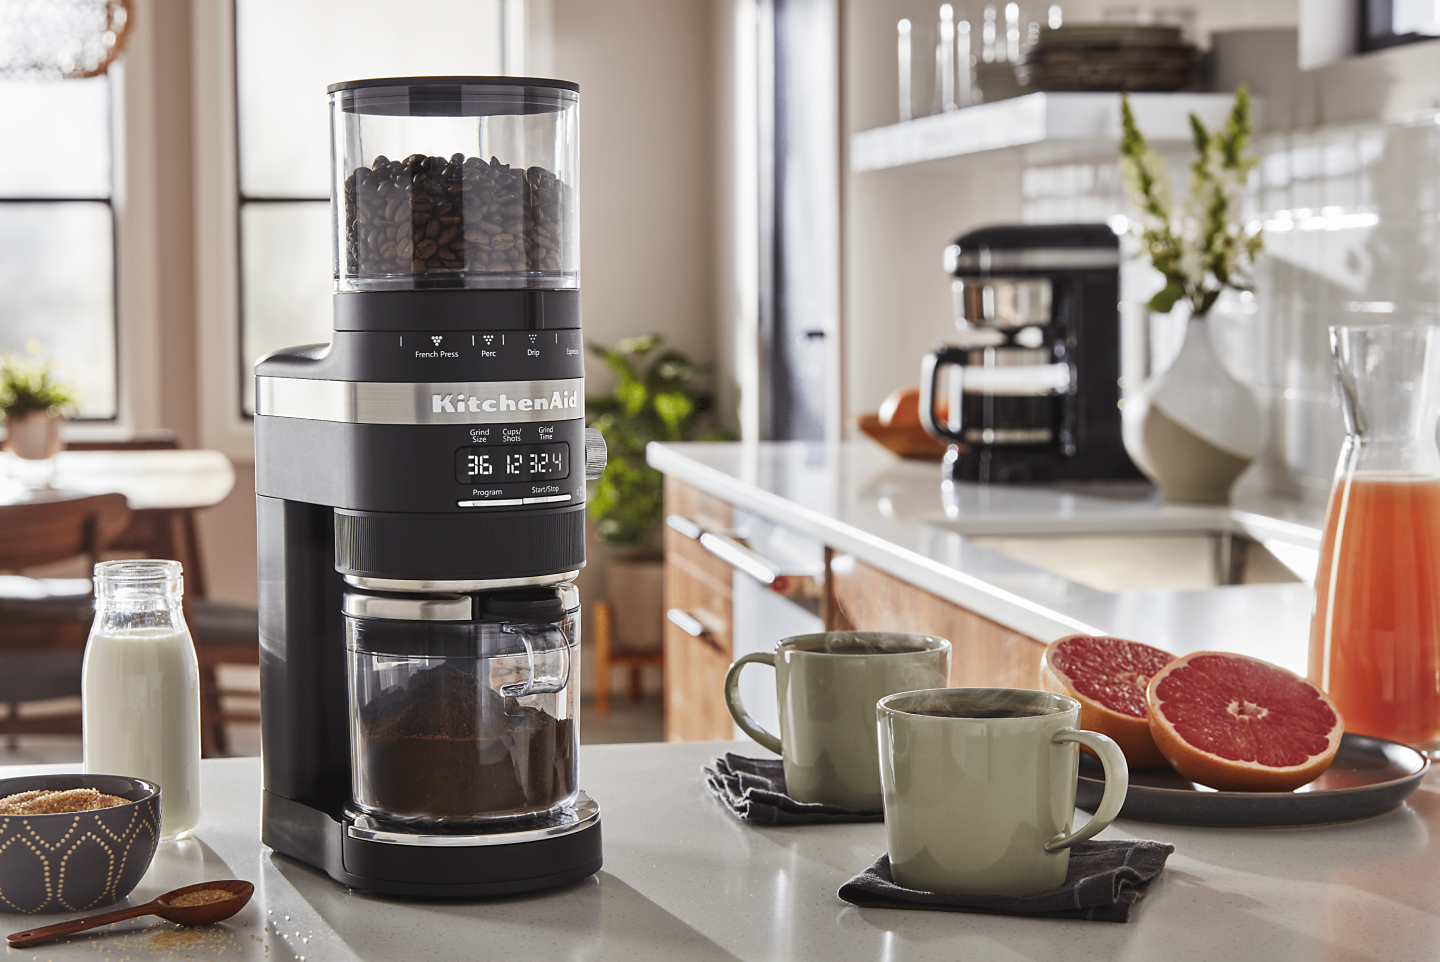 KitchenAid® burr grinder full of coffee beans next to two mugs